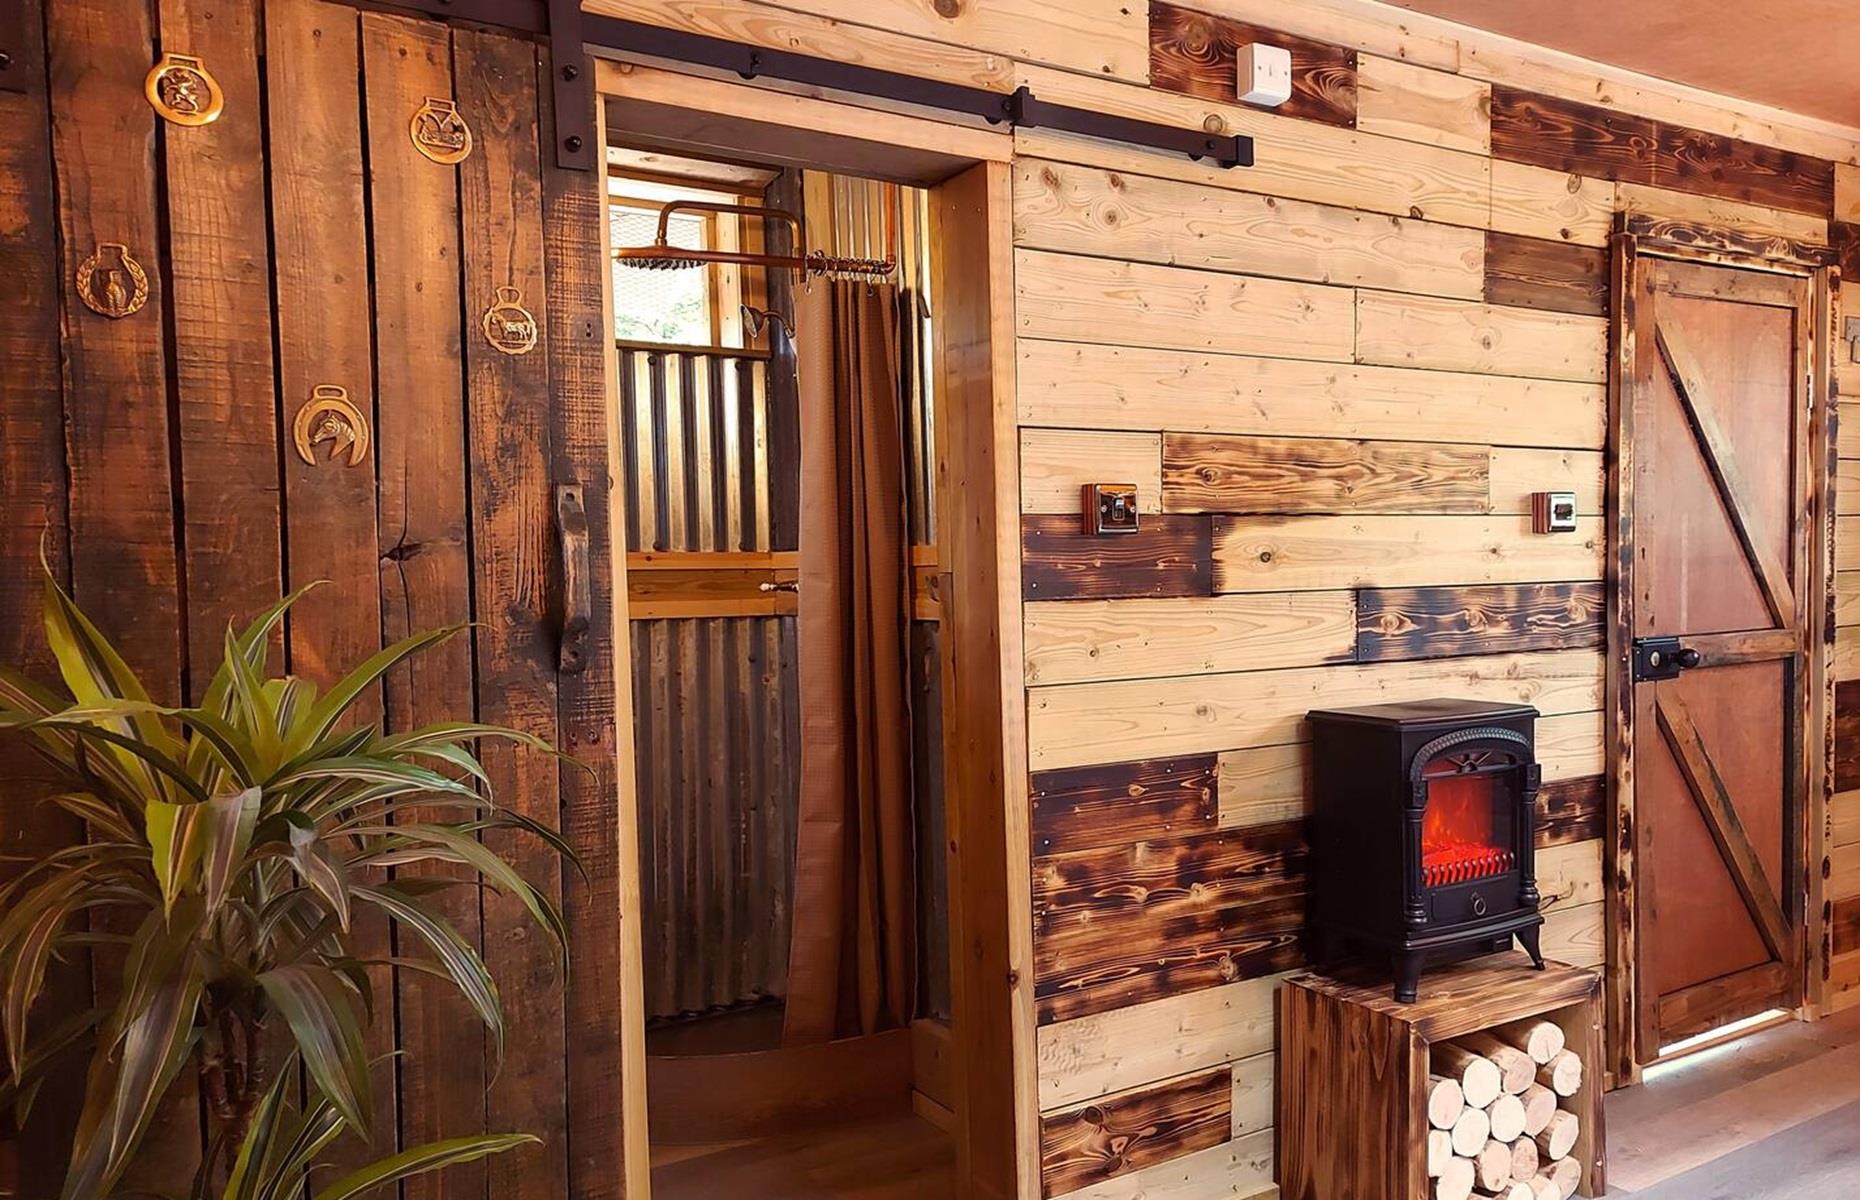 <p>Designed with a reclaimed and upcycled ethos in mind, the cabin is bursting with unusual details and handmade elements, from mismatched timber walls to sliding barn doors and even tree branch dividers. There’s a double bedroom, a sitting area with a log burner, a kitchen and a private bathroom with a composting, waterless toilet and shower.</p>